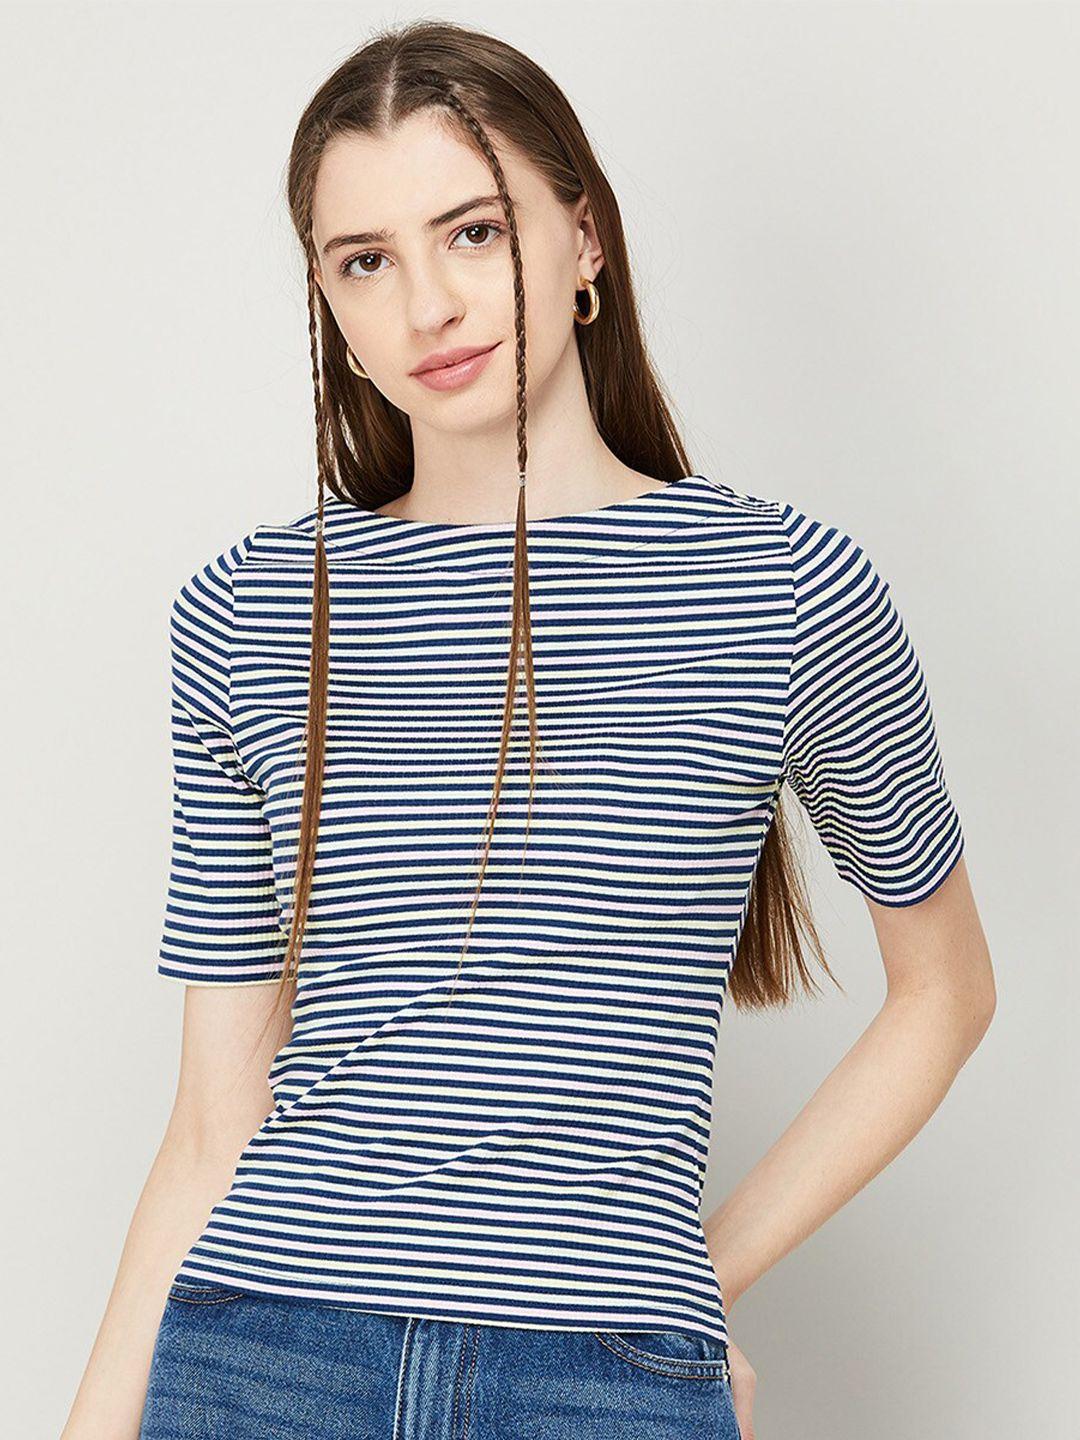 ginger-by-lifestyle-striped-regular-top